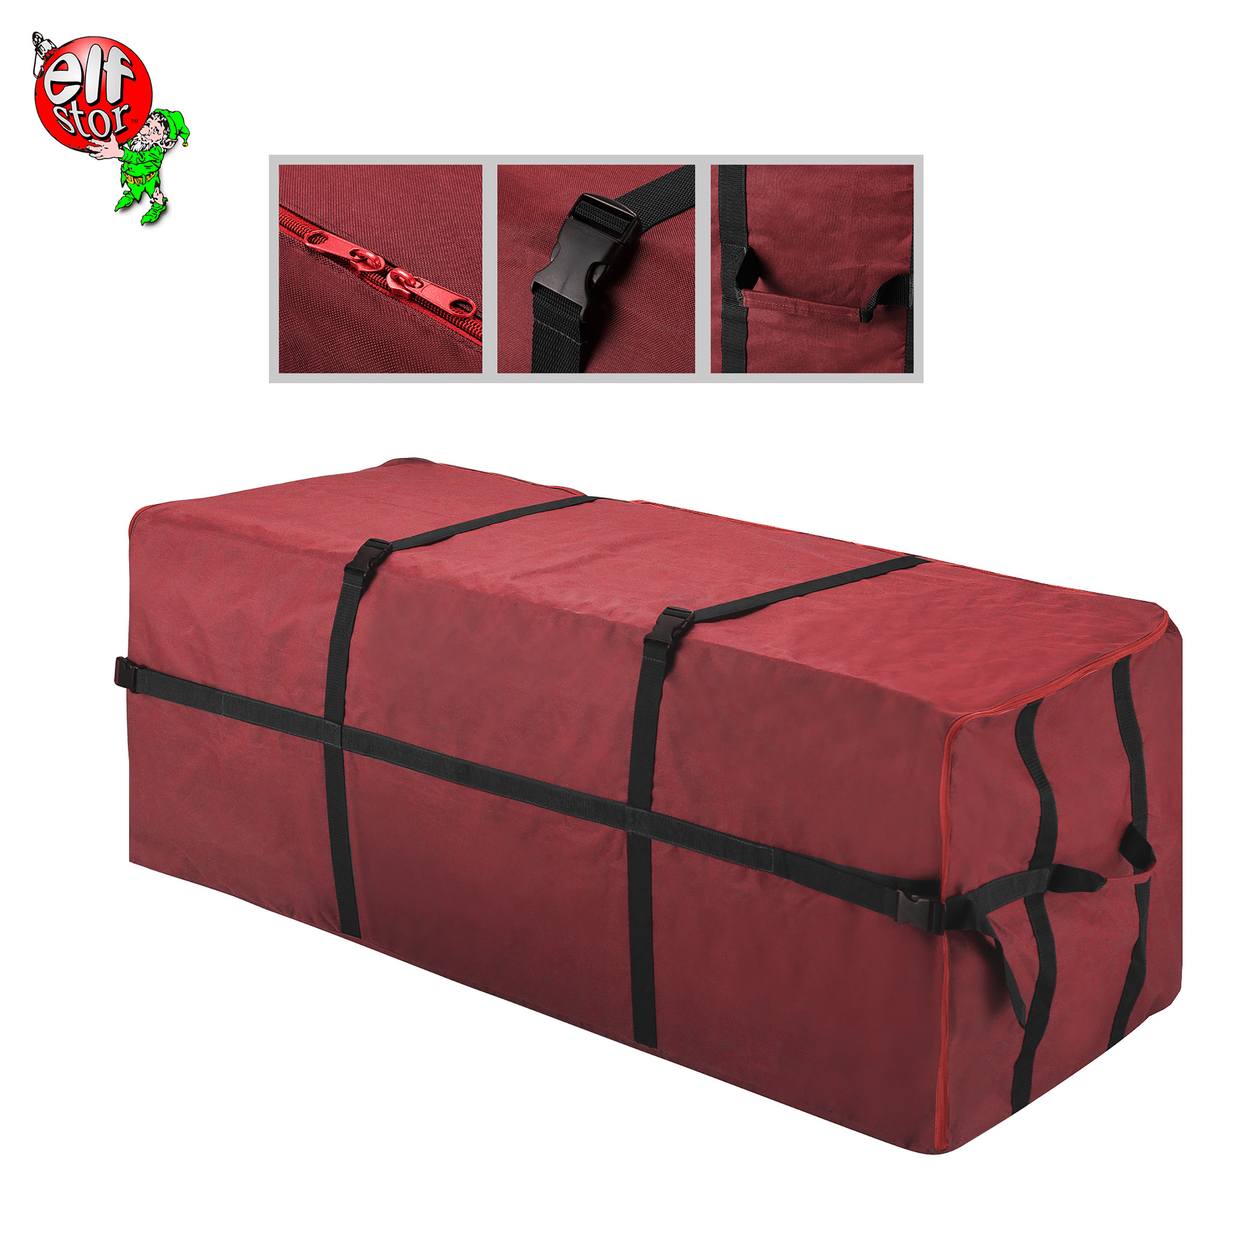 Elf Stor Red Christmas Tree Canvas Storage Bag Large For 7.5 Foot Tree